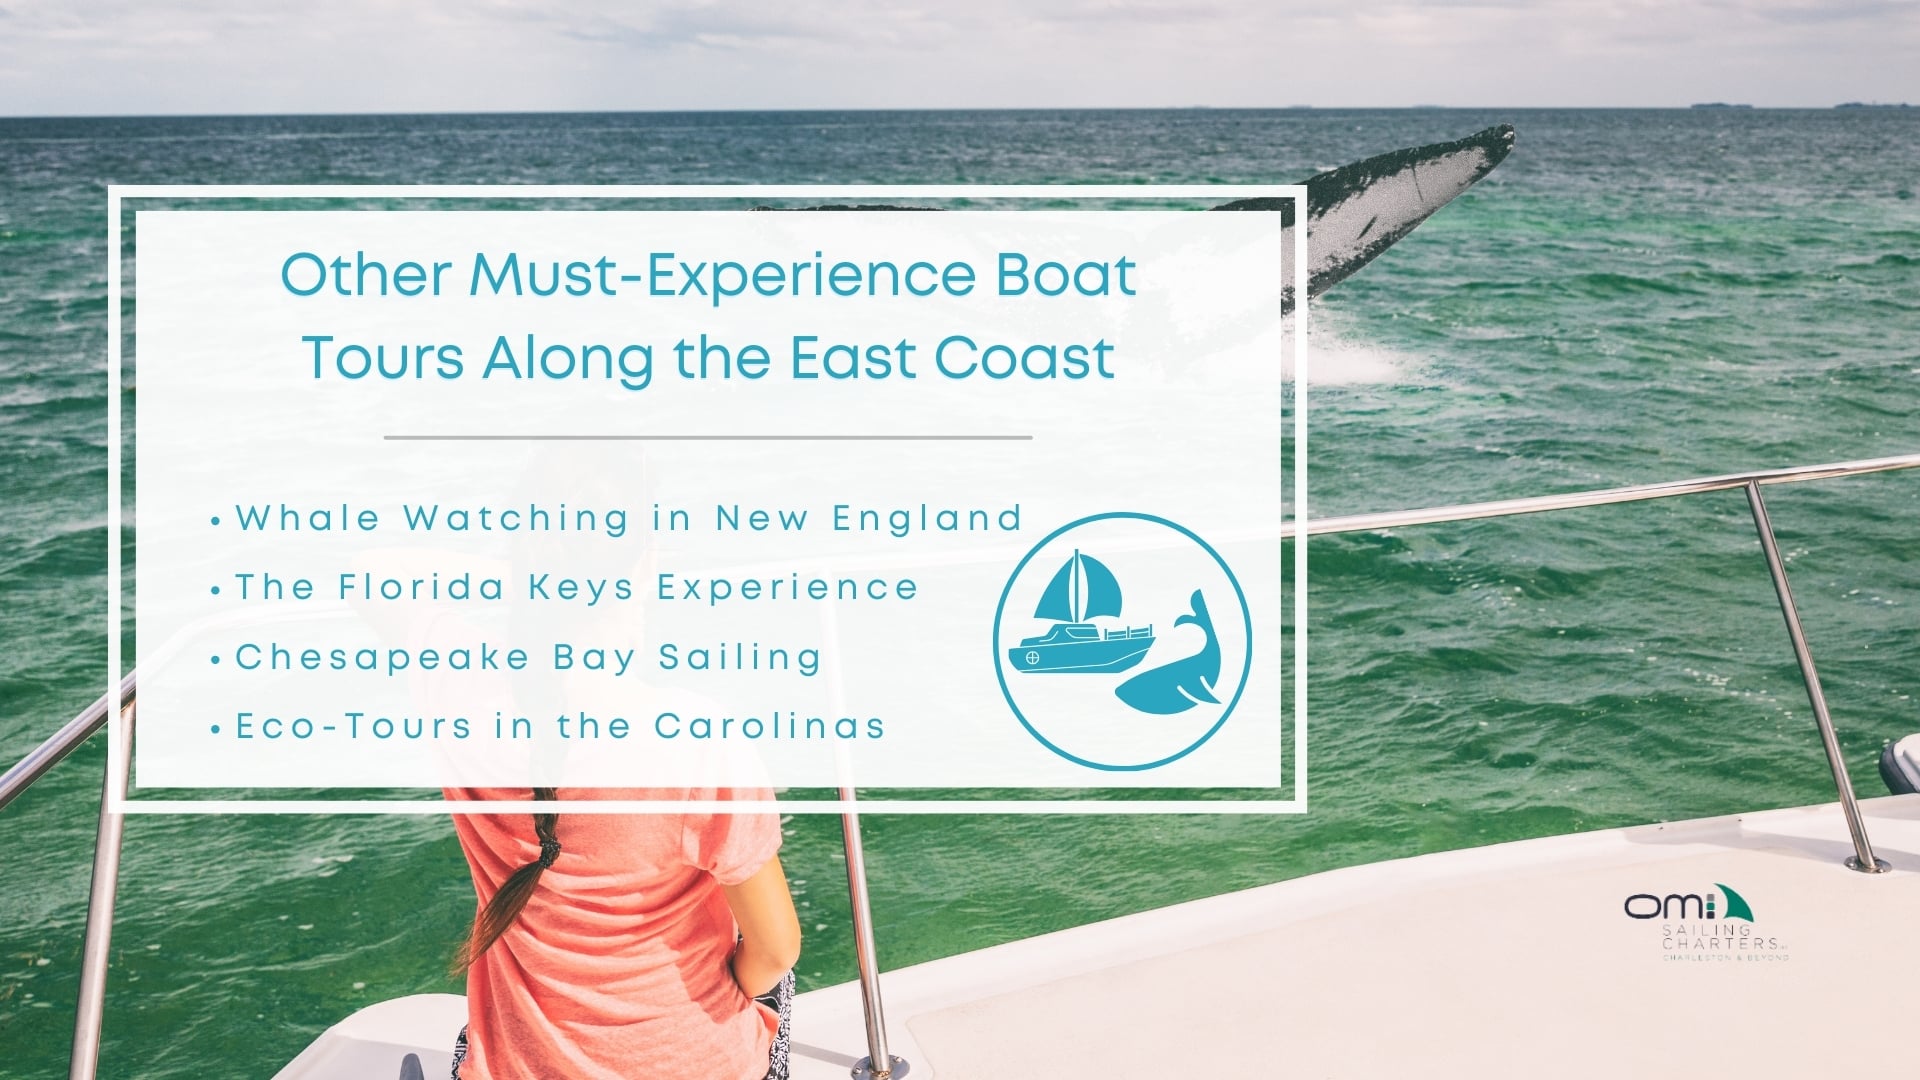 Infographic image of other must-experience boat tours along the east coast